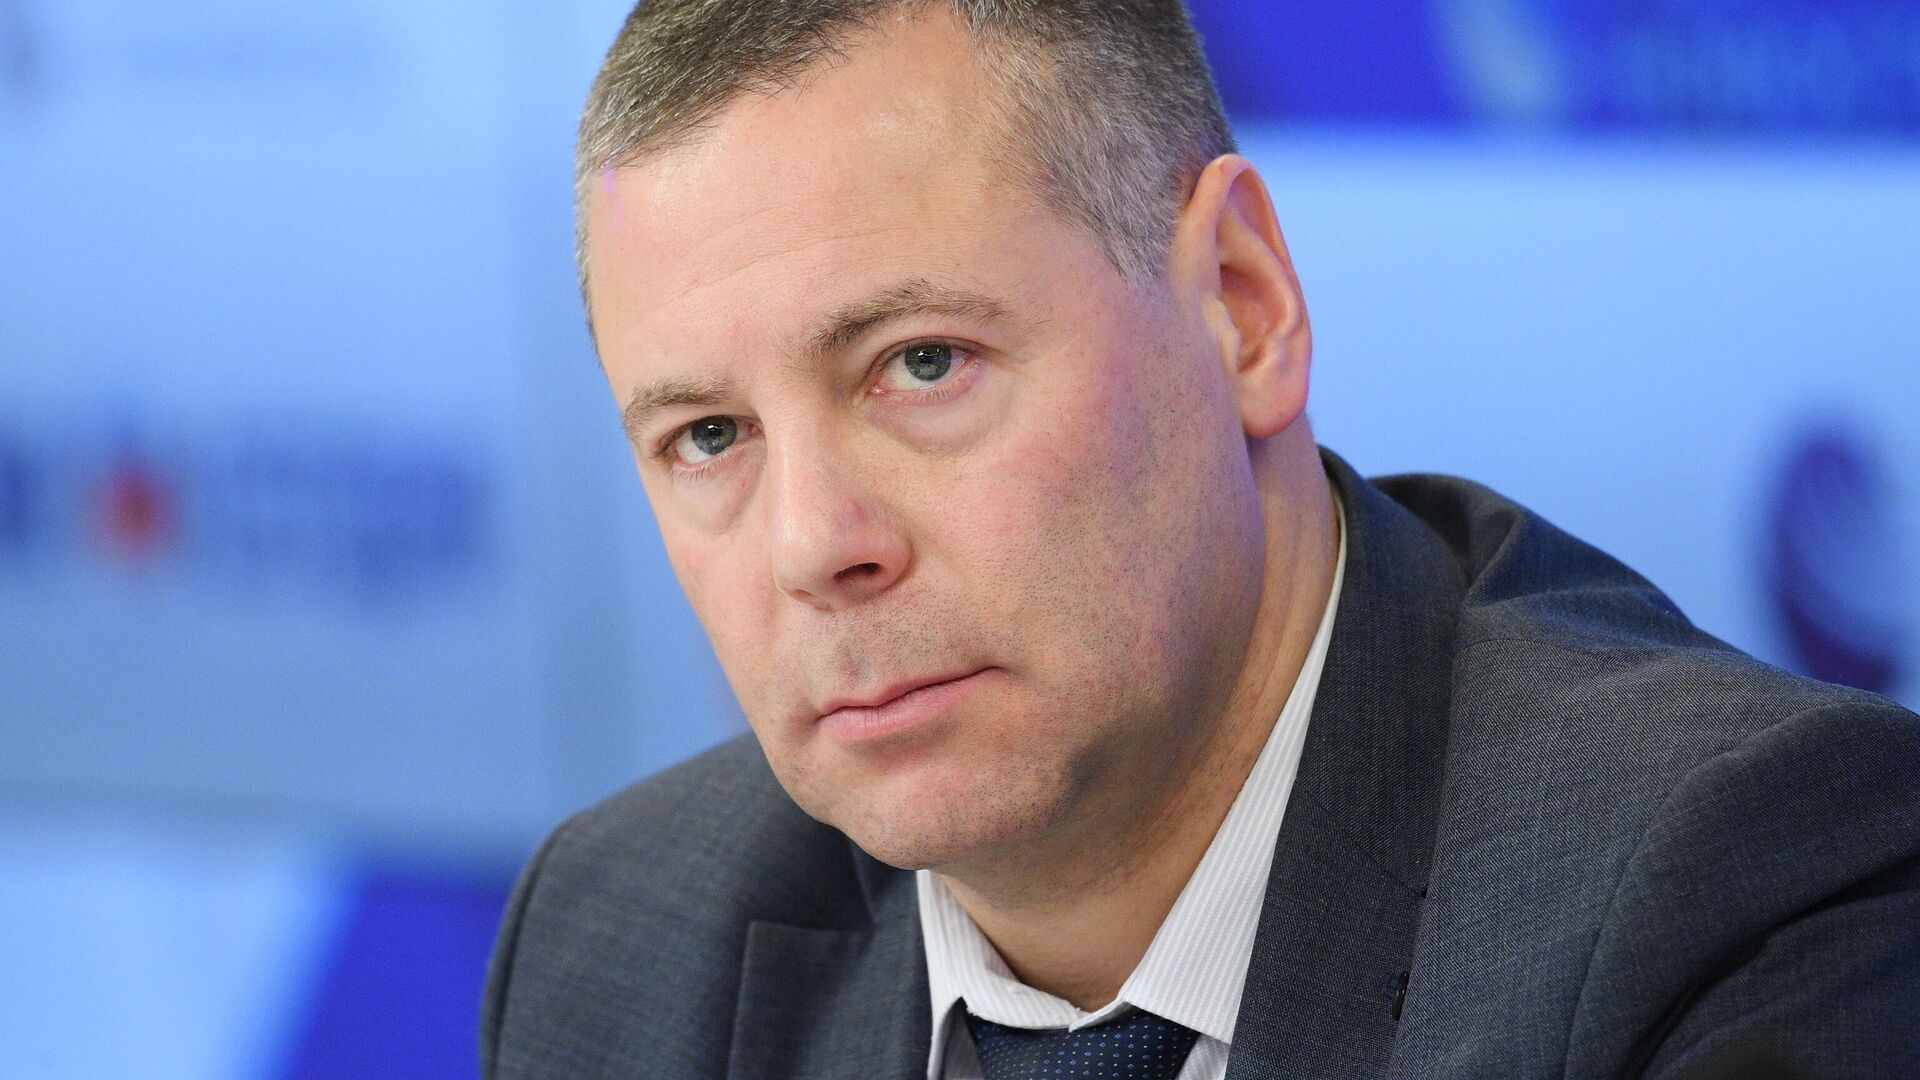 Evraev won the election of the governor of the Yaroslavl region